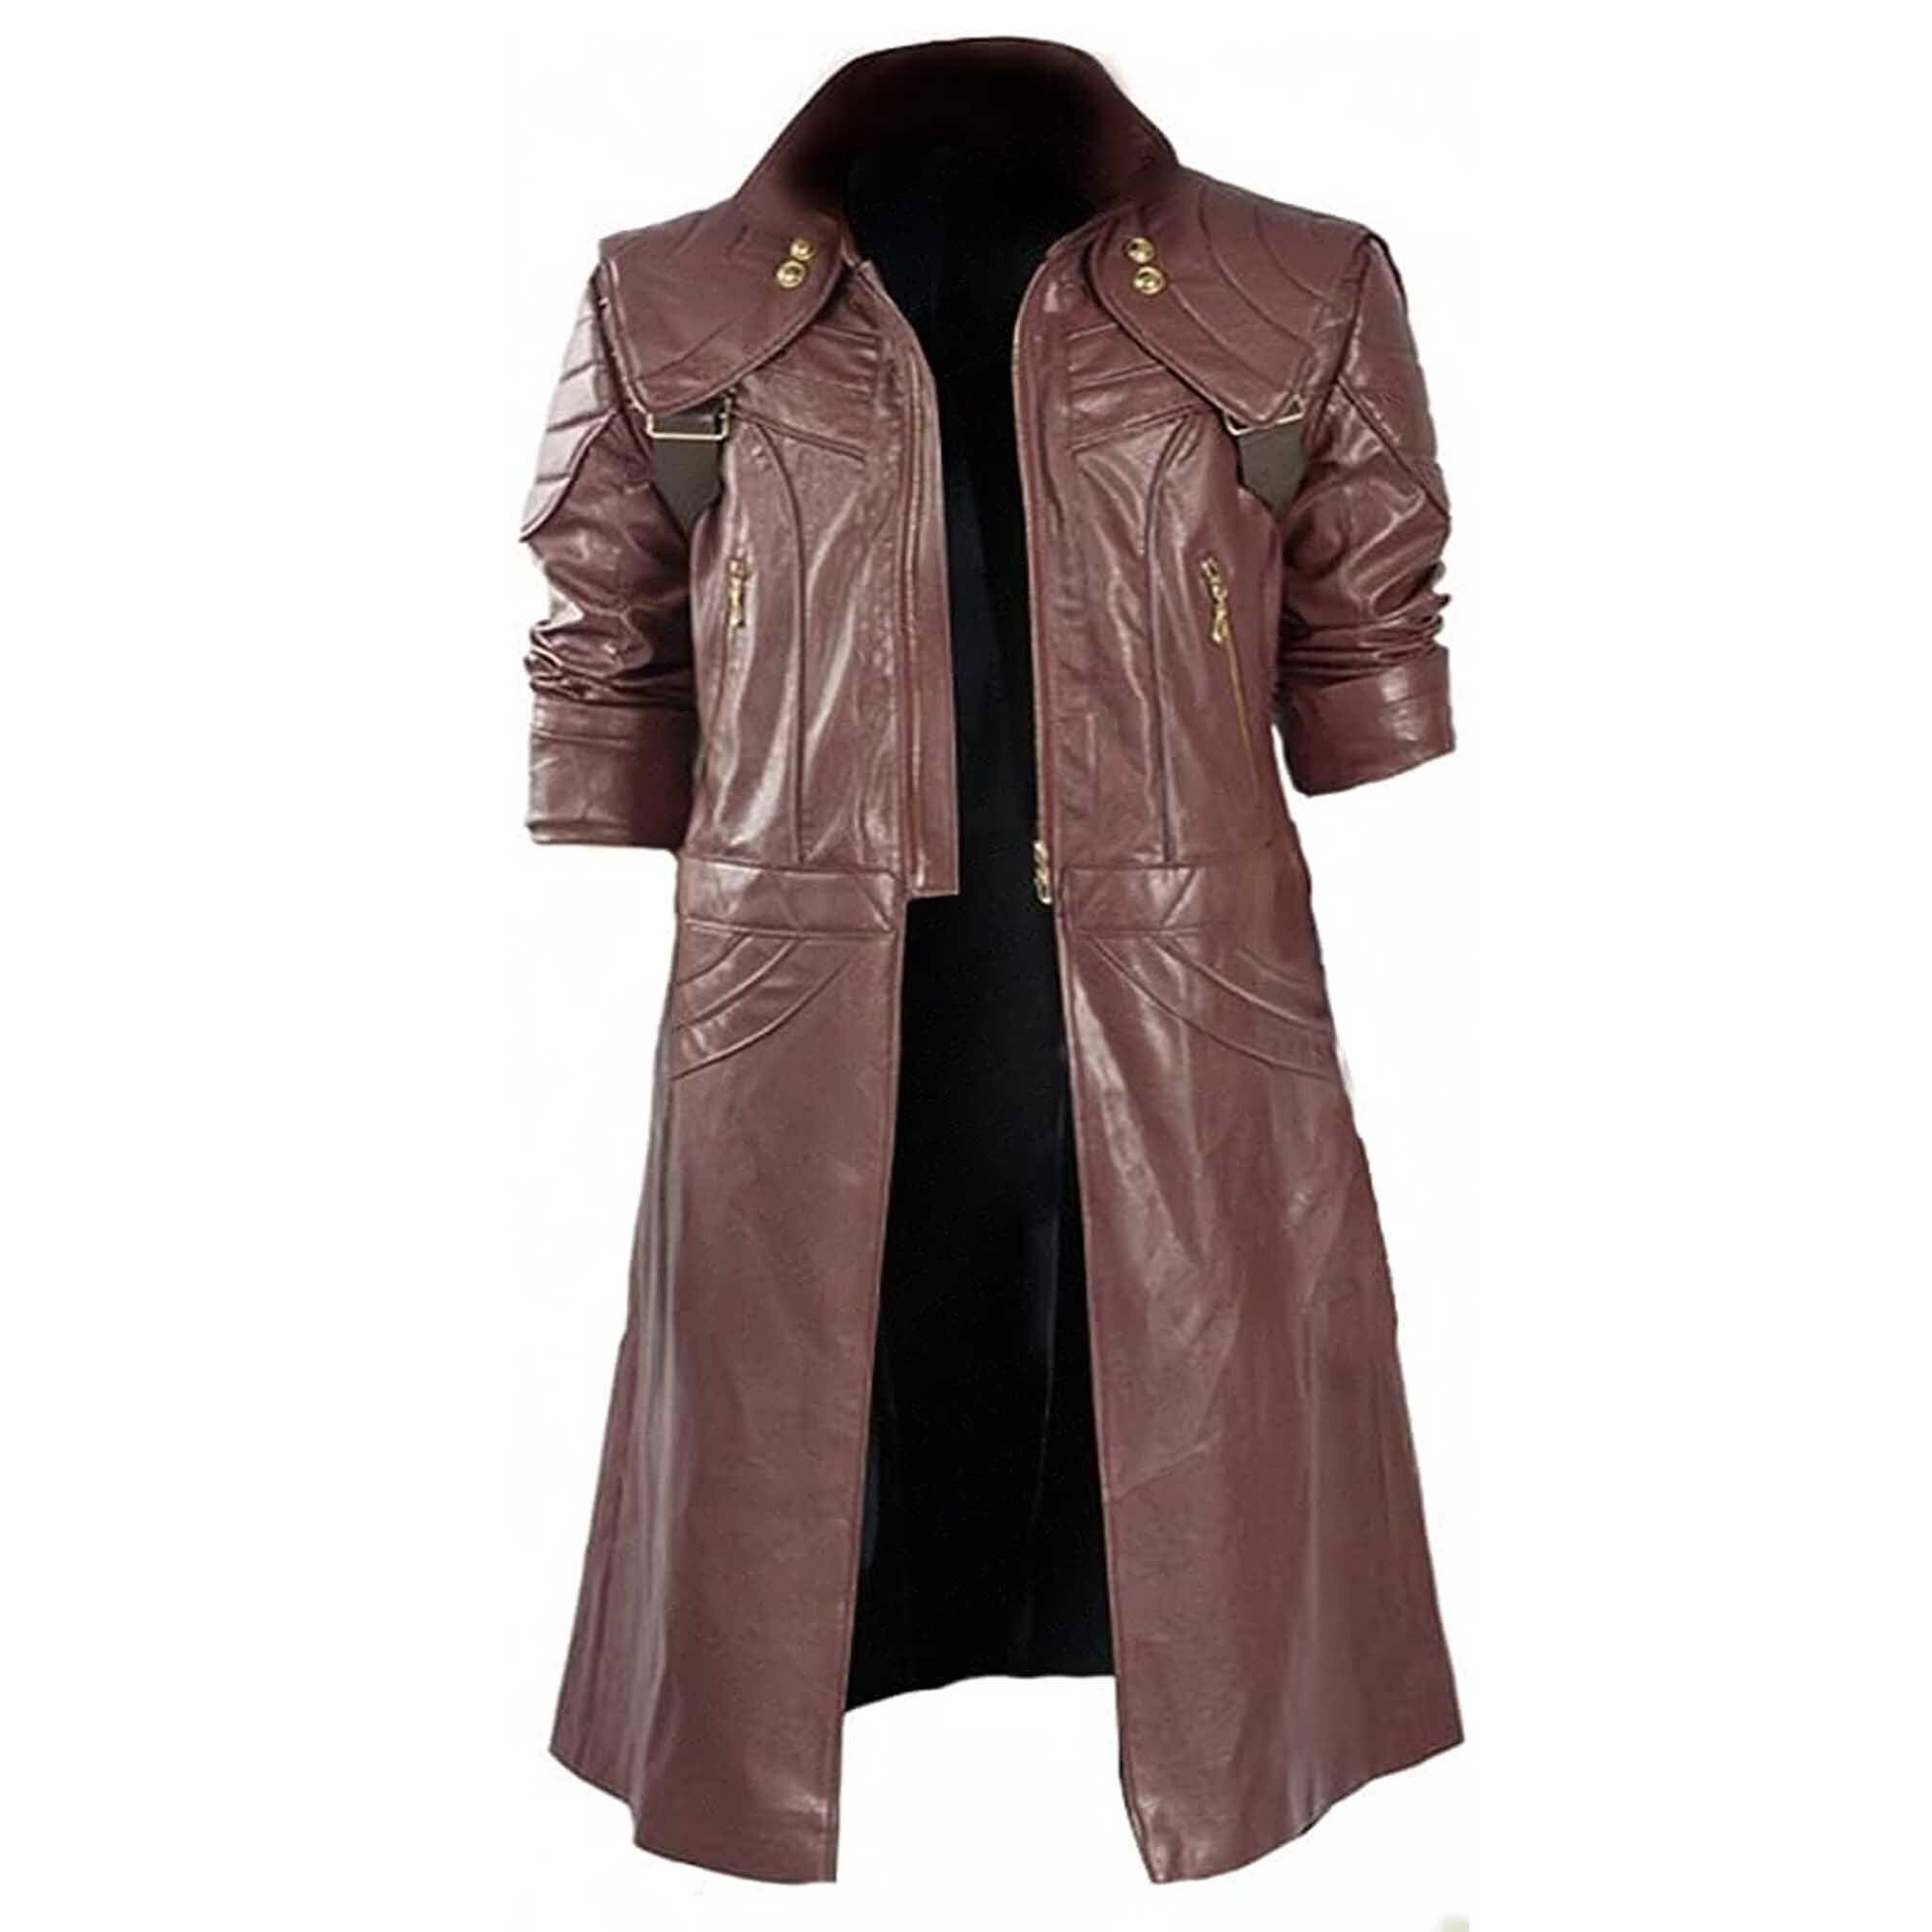 Devil May Cry V DMC5 Dante Aged Outfit Leather Cosplay Costume